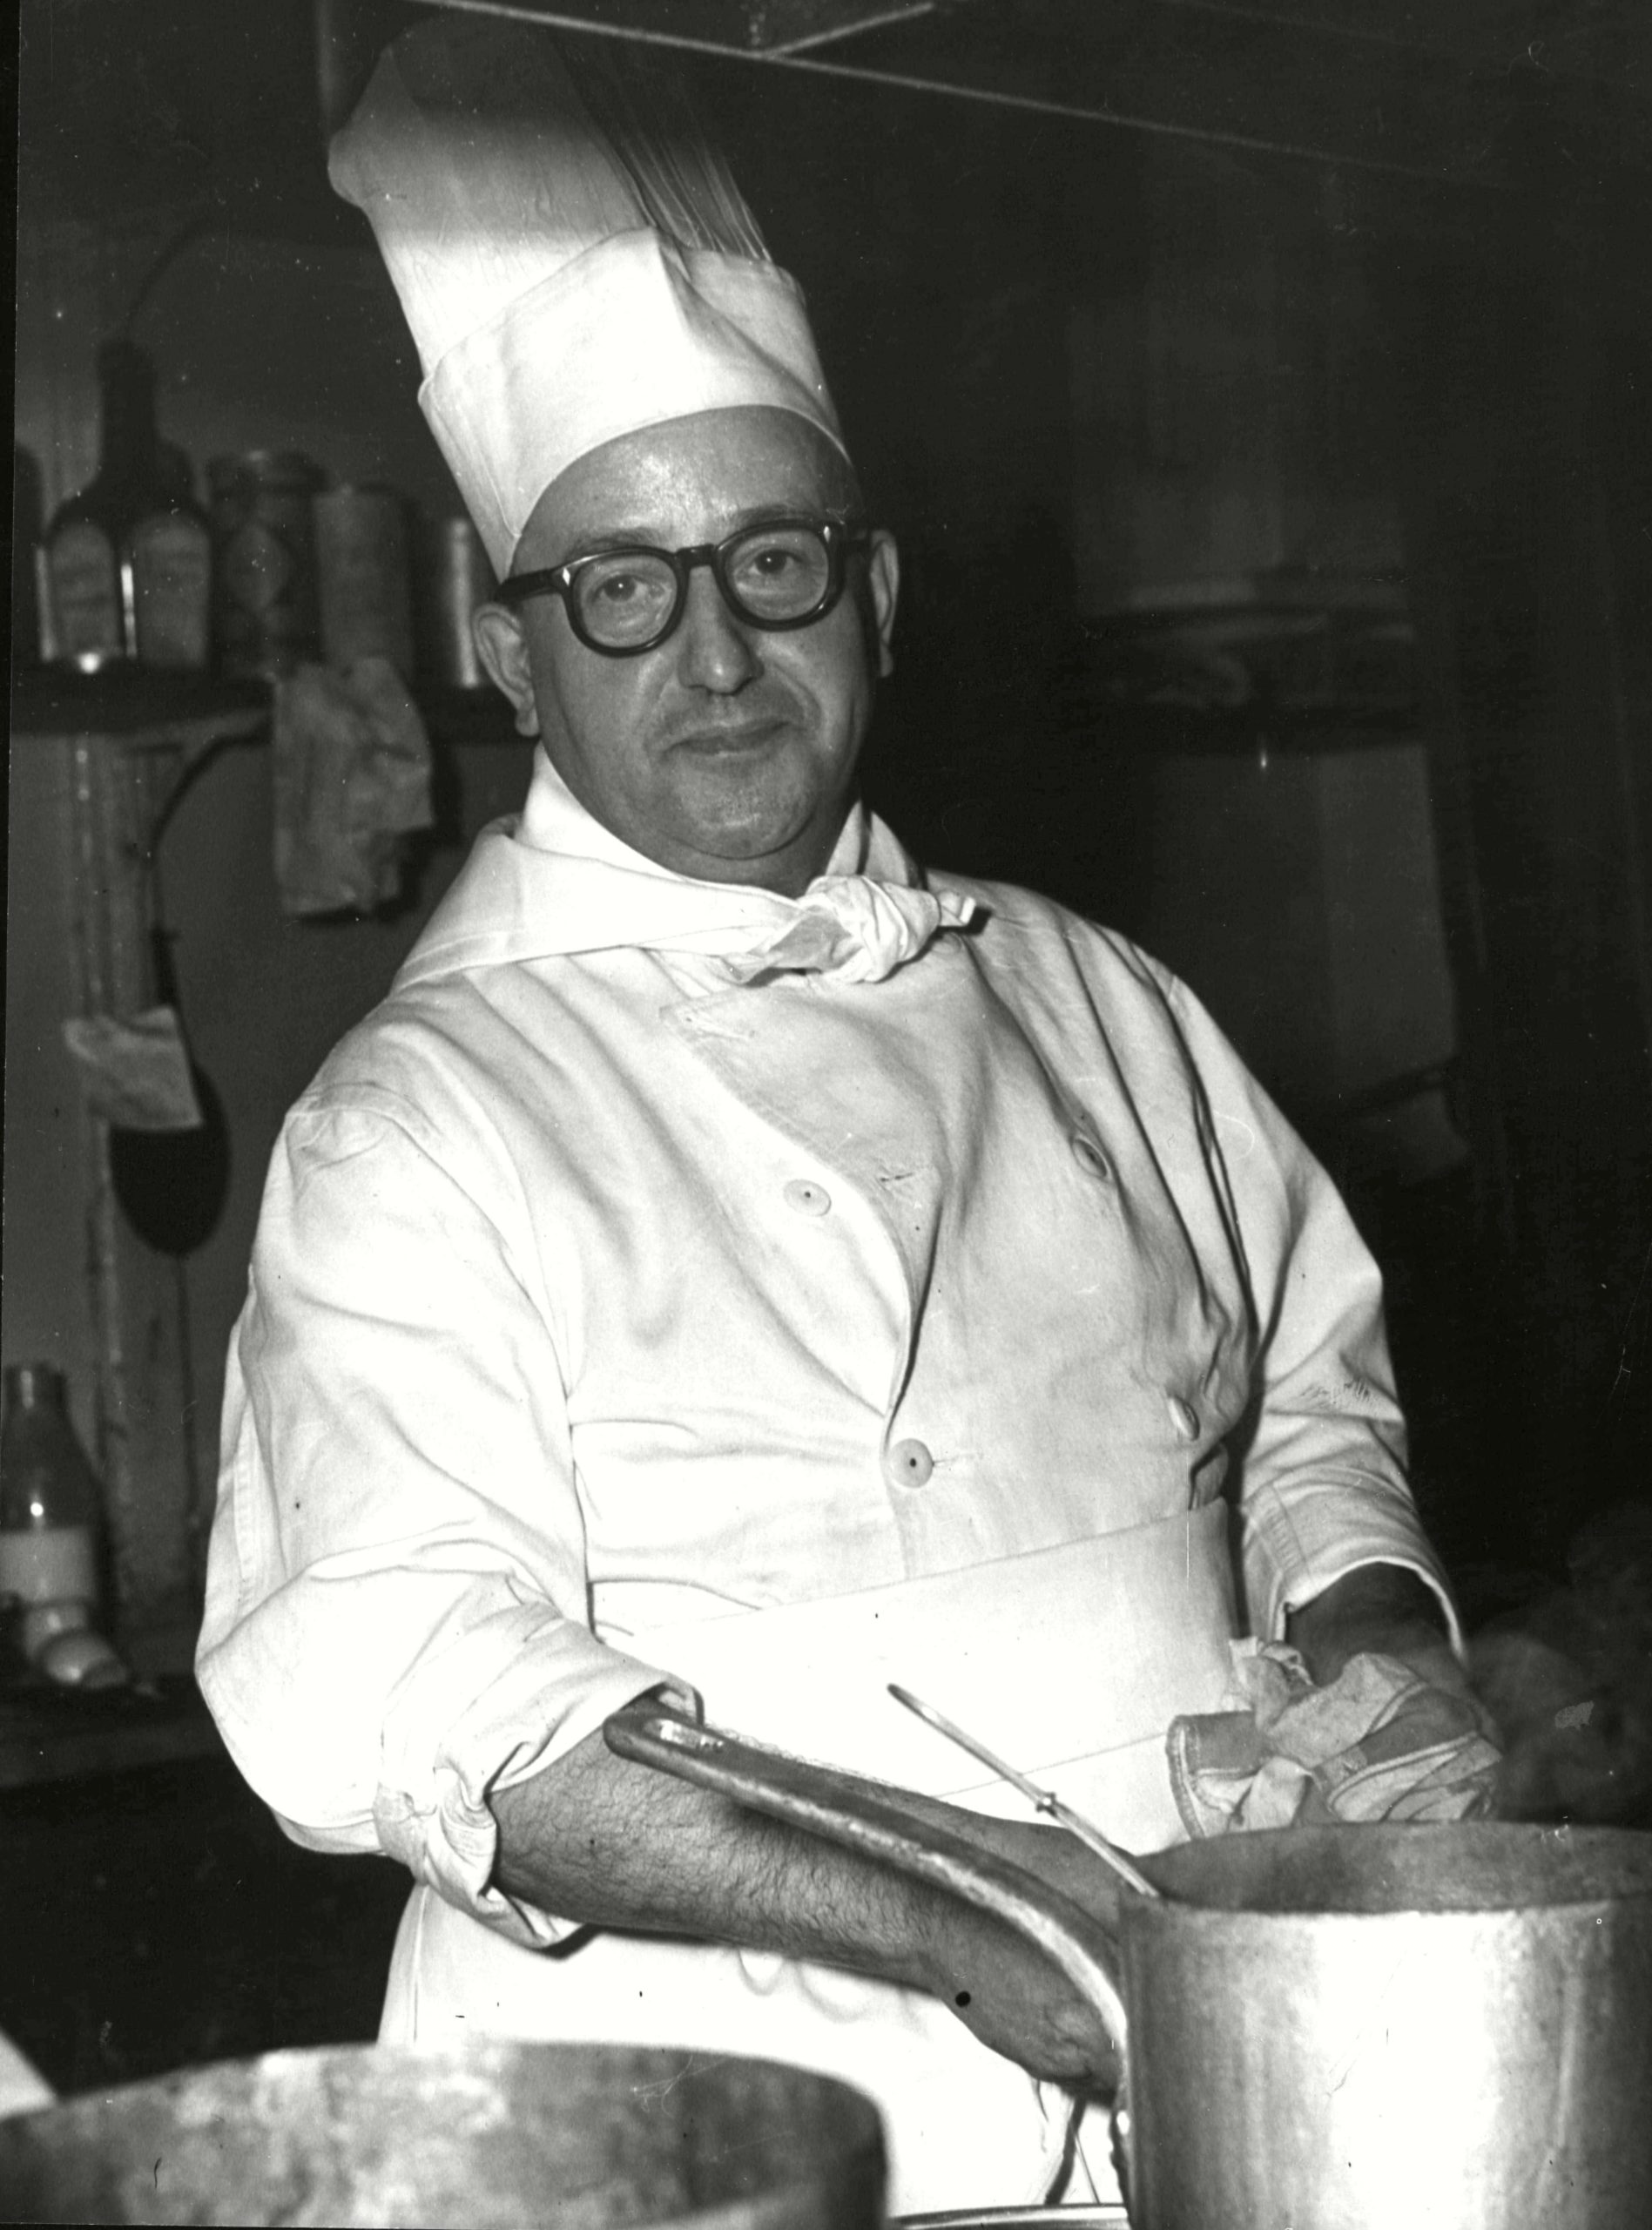 Chef John Wright Former Sergeant in the Catering Corps Cooking in the Kitchen of the Moulin D’or Restaurant Soho, 27 Dec 1955